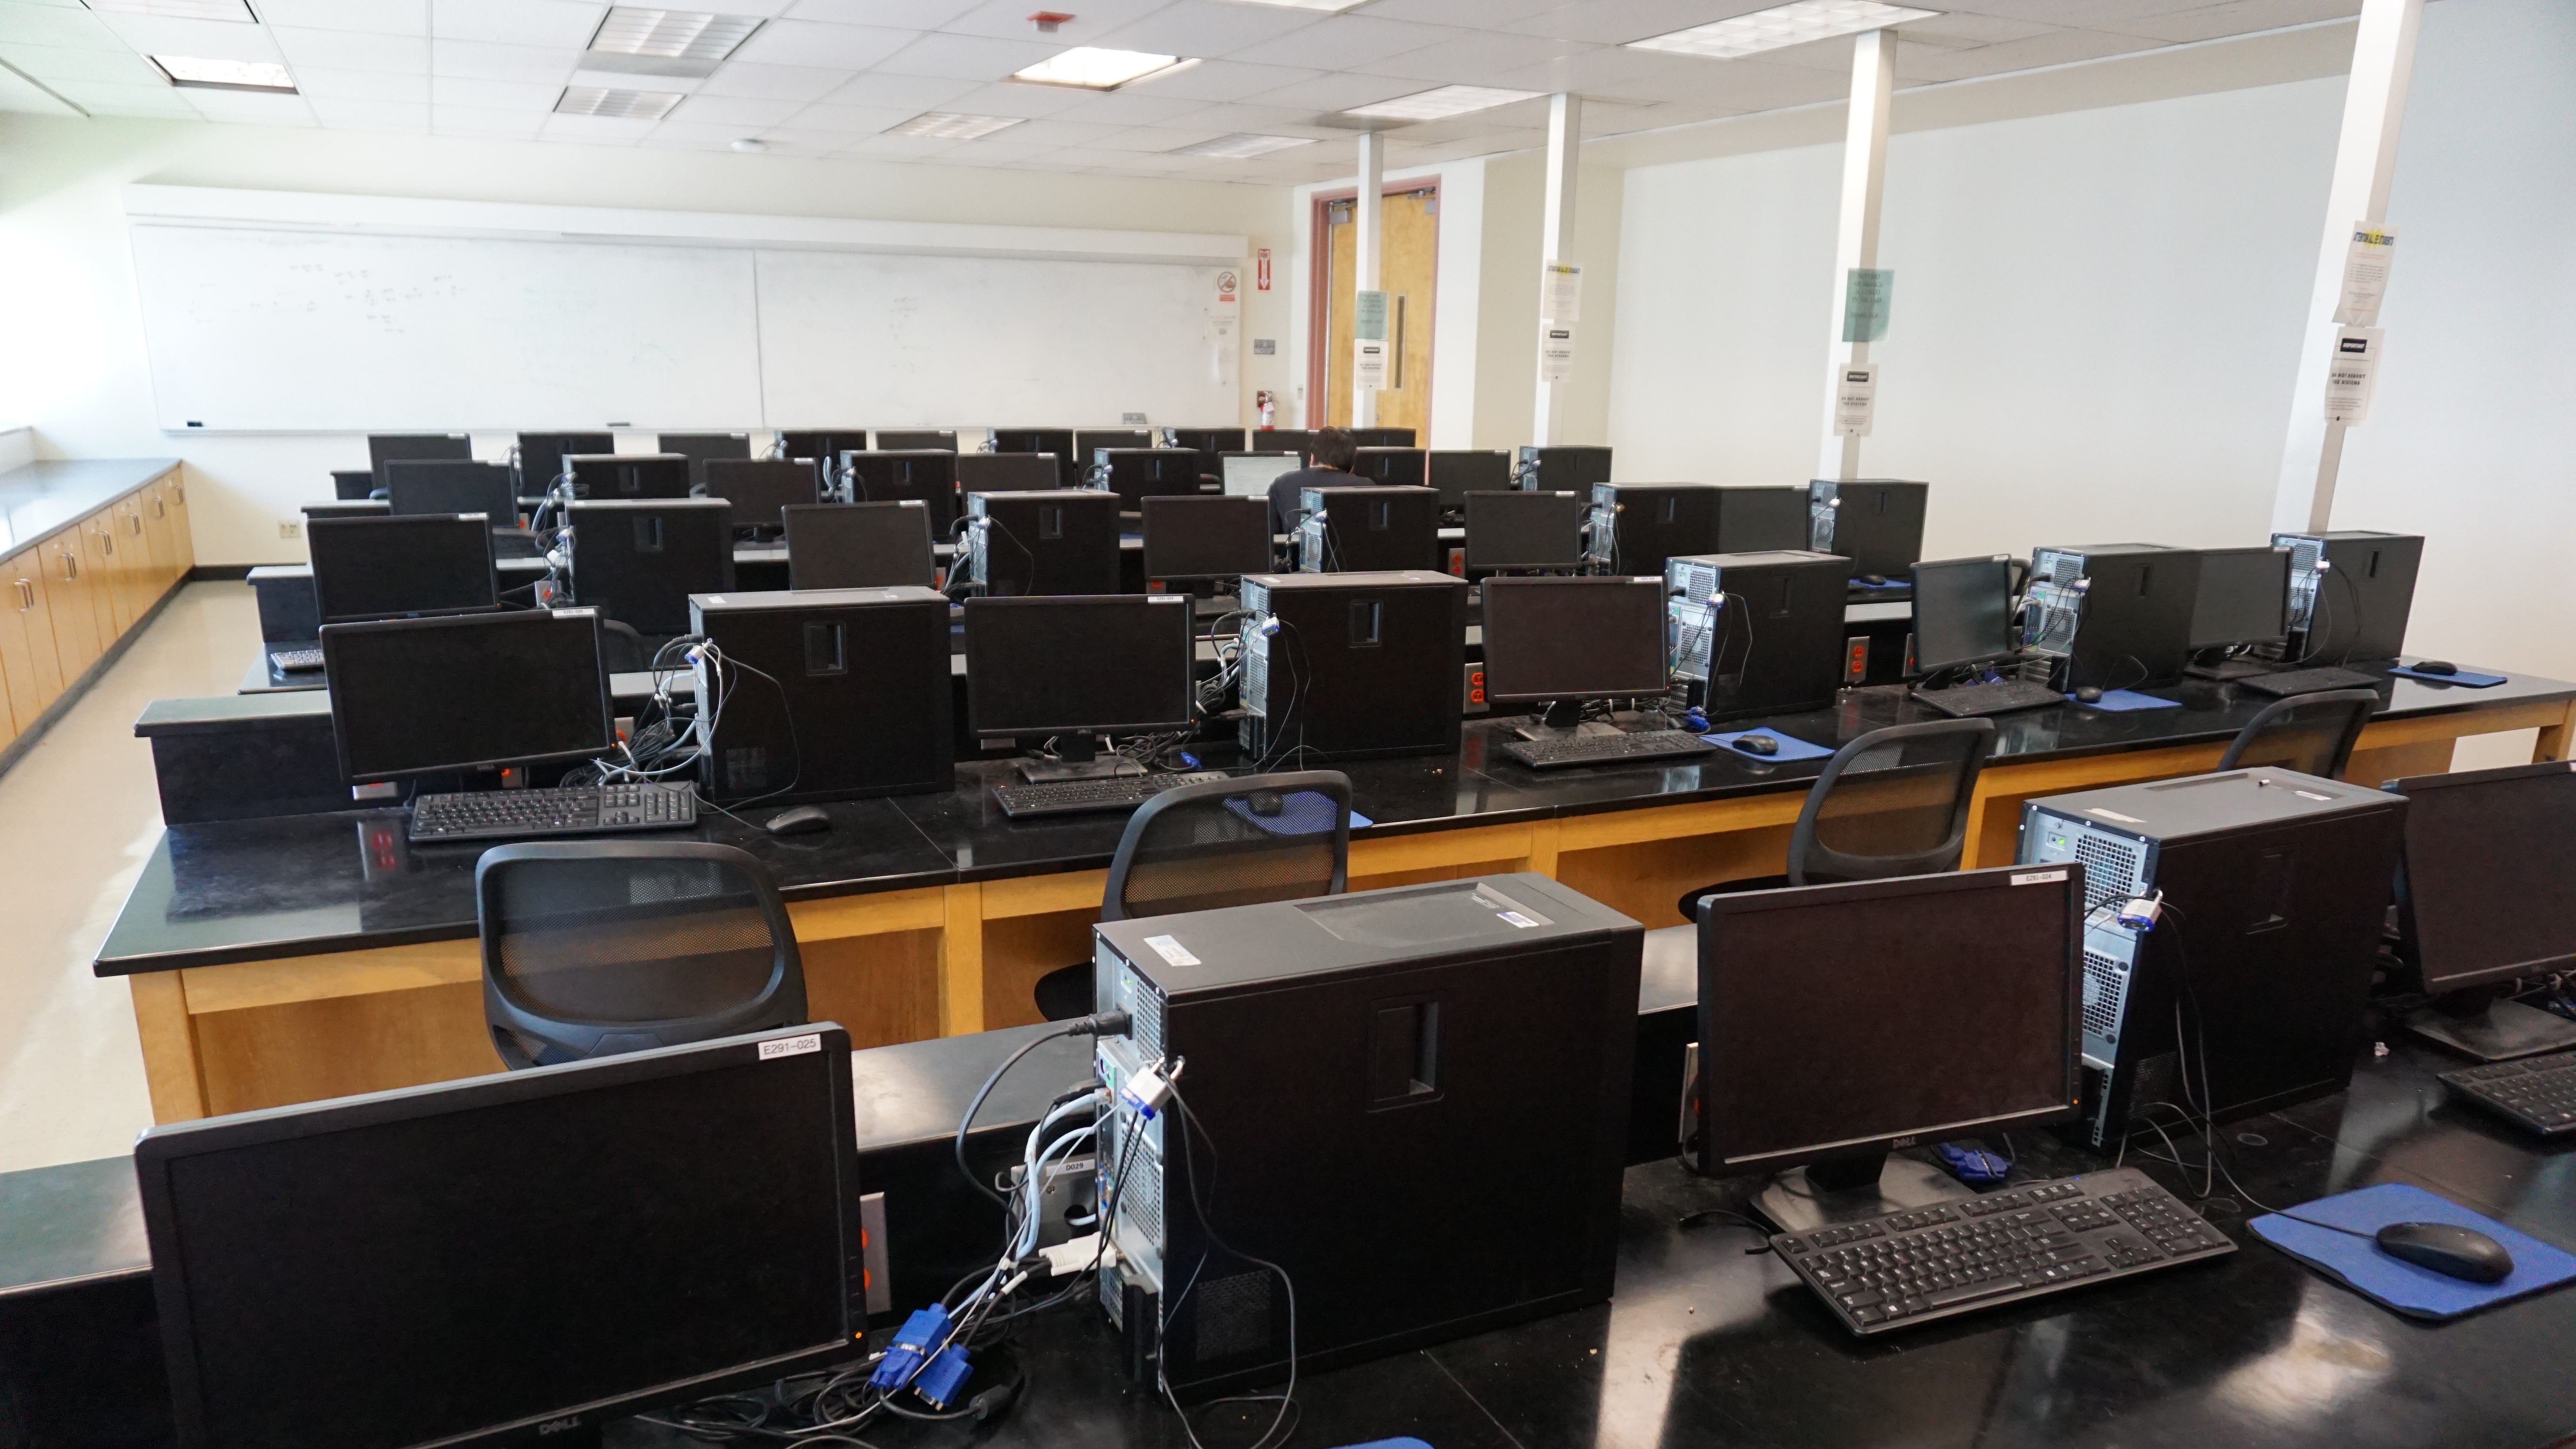 A classroom full of computer stations with whiteboards hanging on every wall.